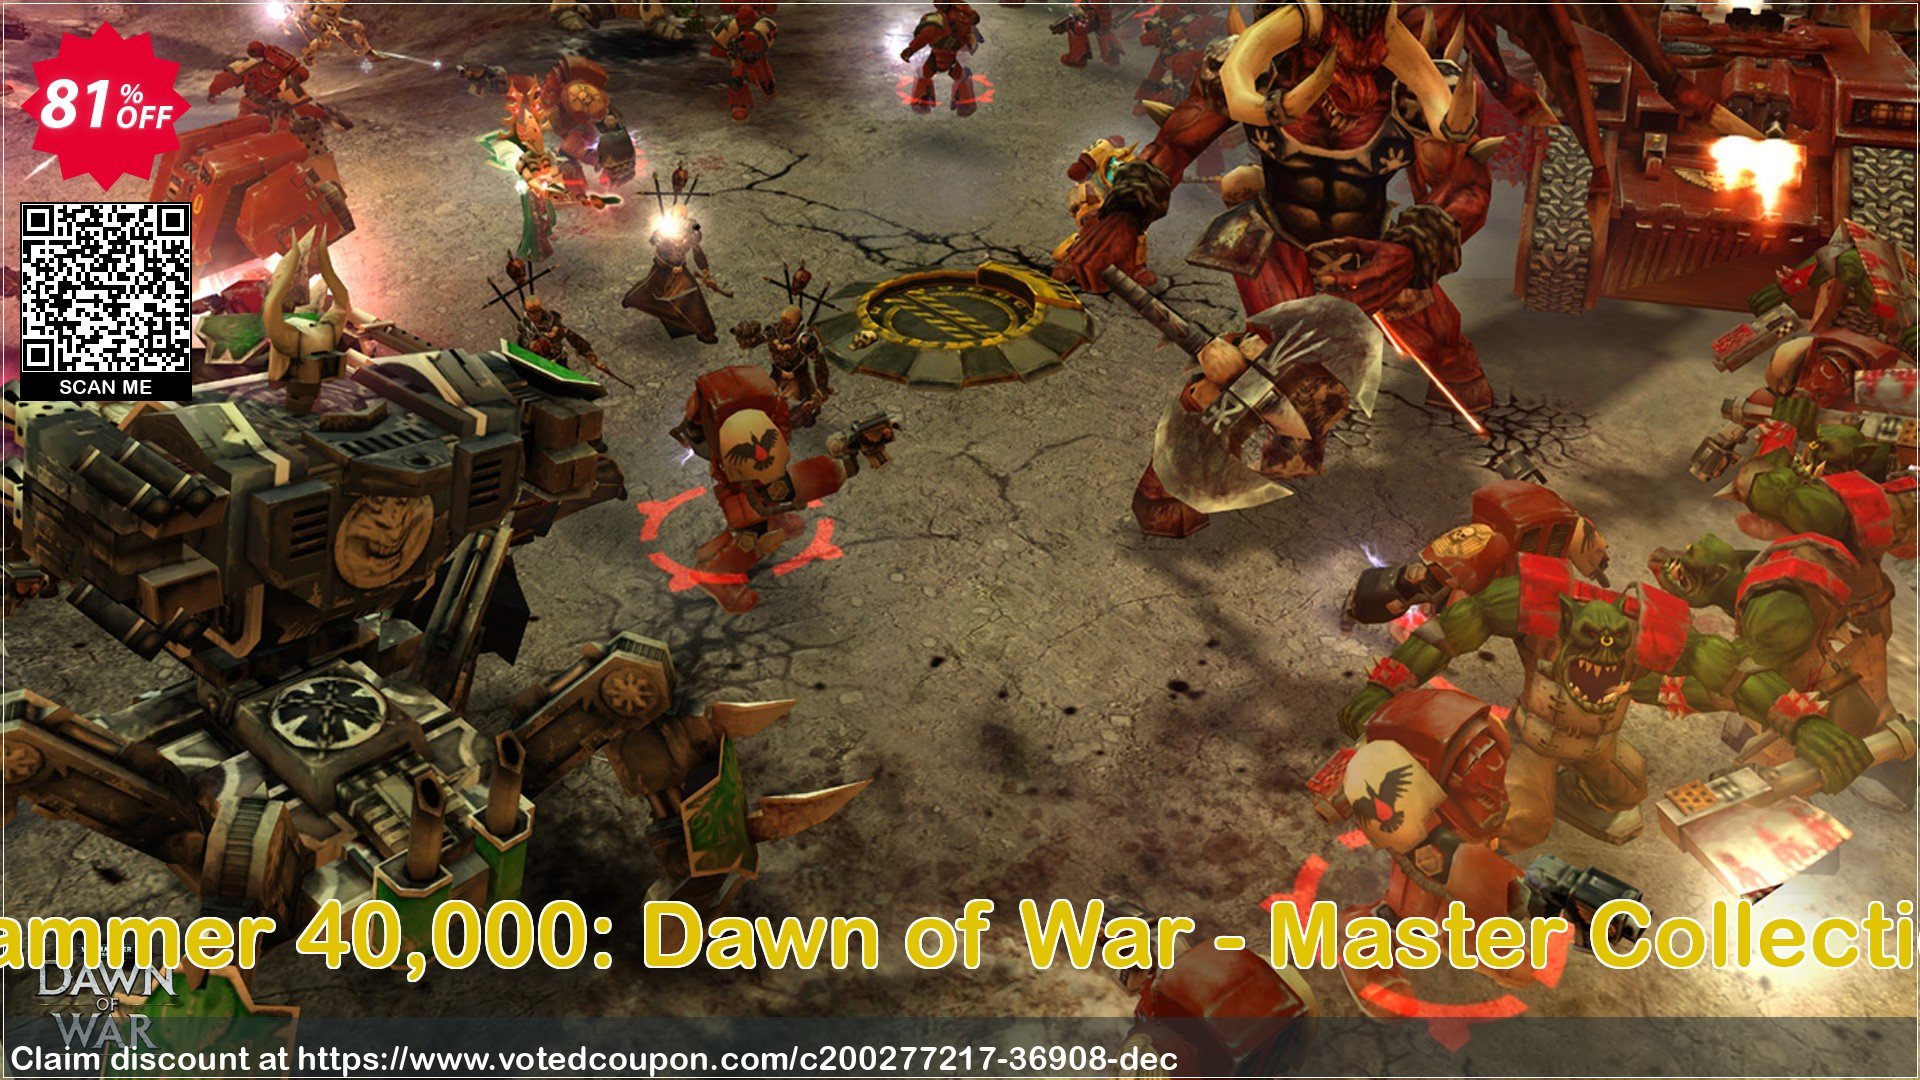 Warhammer 40,000: Dawn of War - Master Collection PC Coupon Code Apr 2024, 81% OFF - VotedCoupon